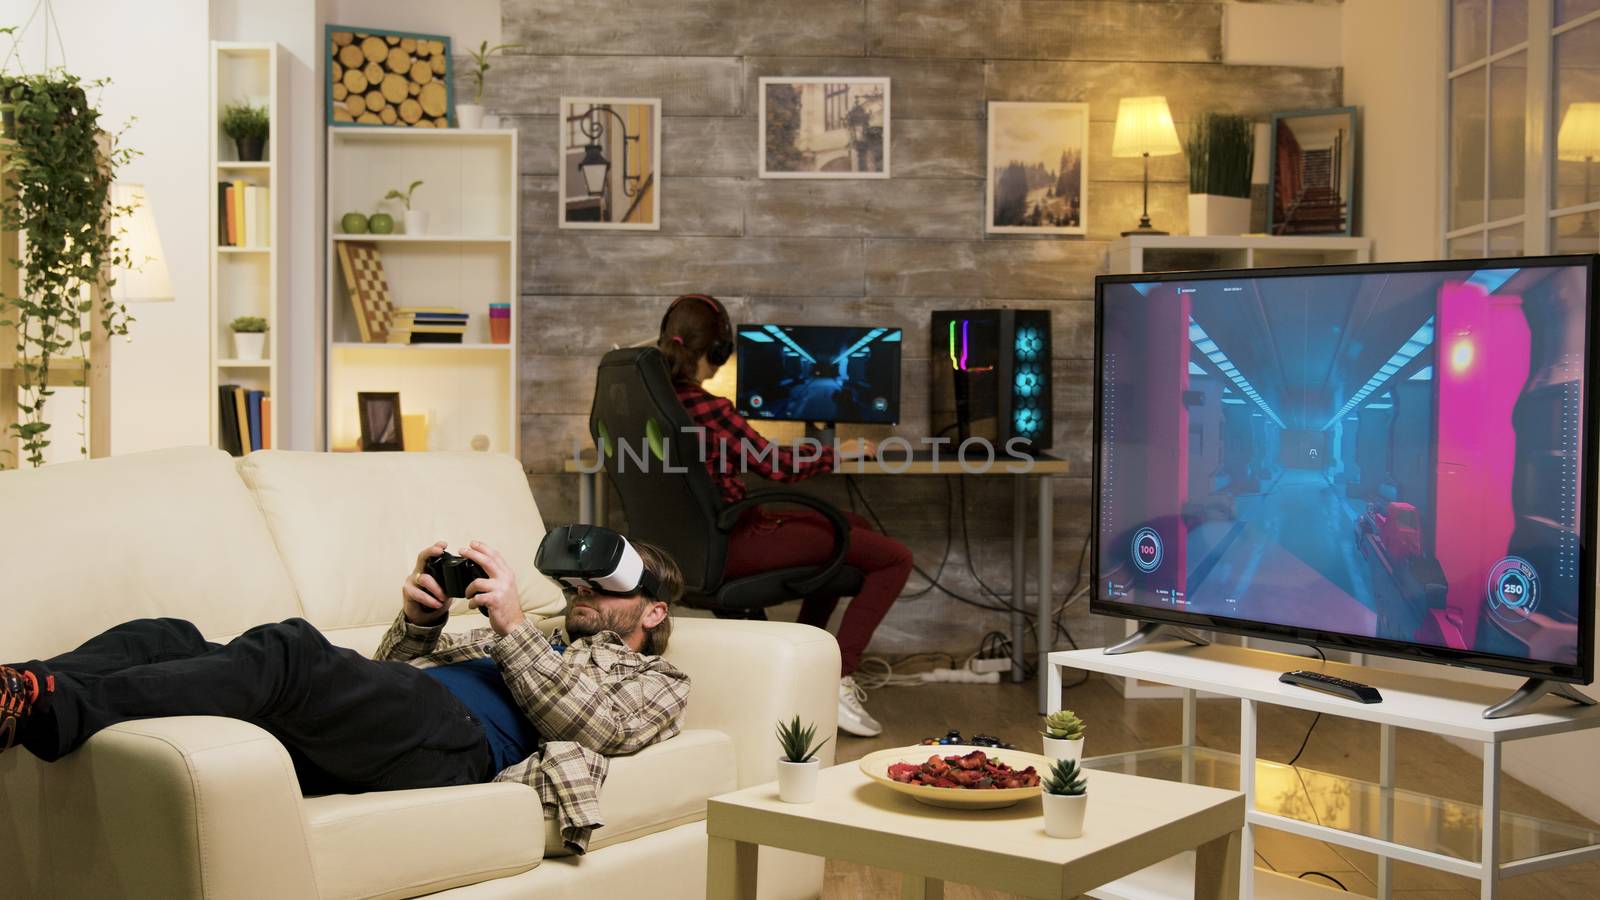 Man lying on sofa playing video games using vr headset with his girlfriend in the background playing on computer.